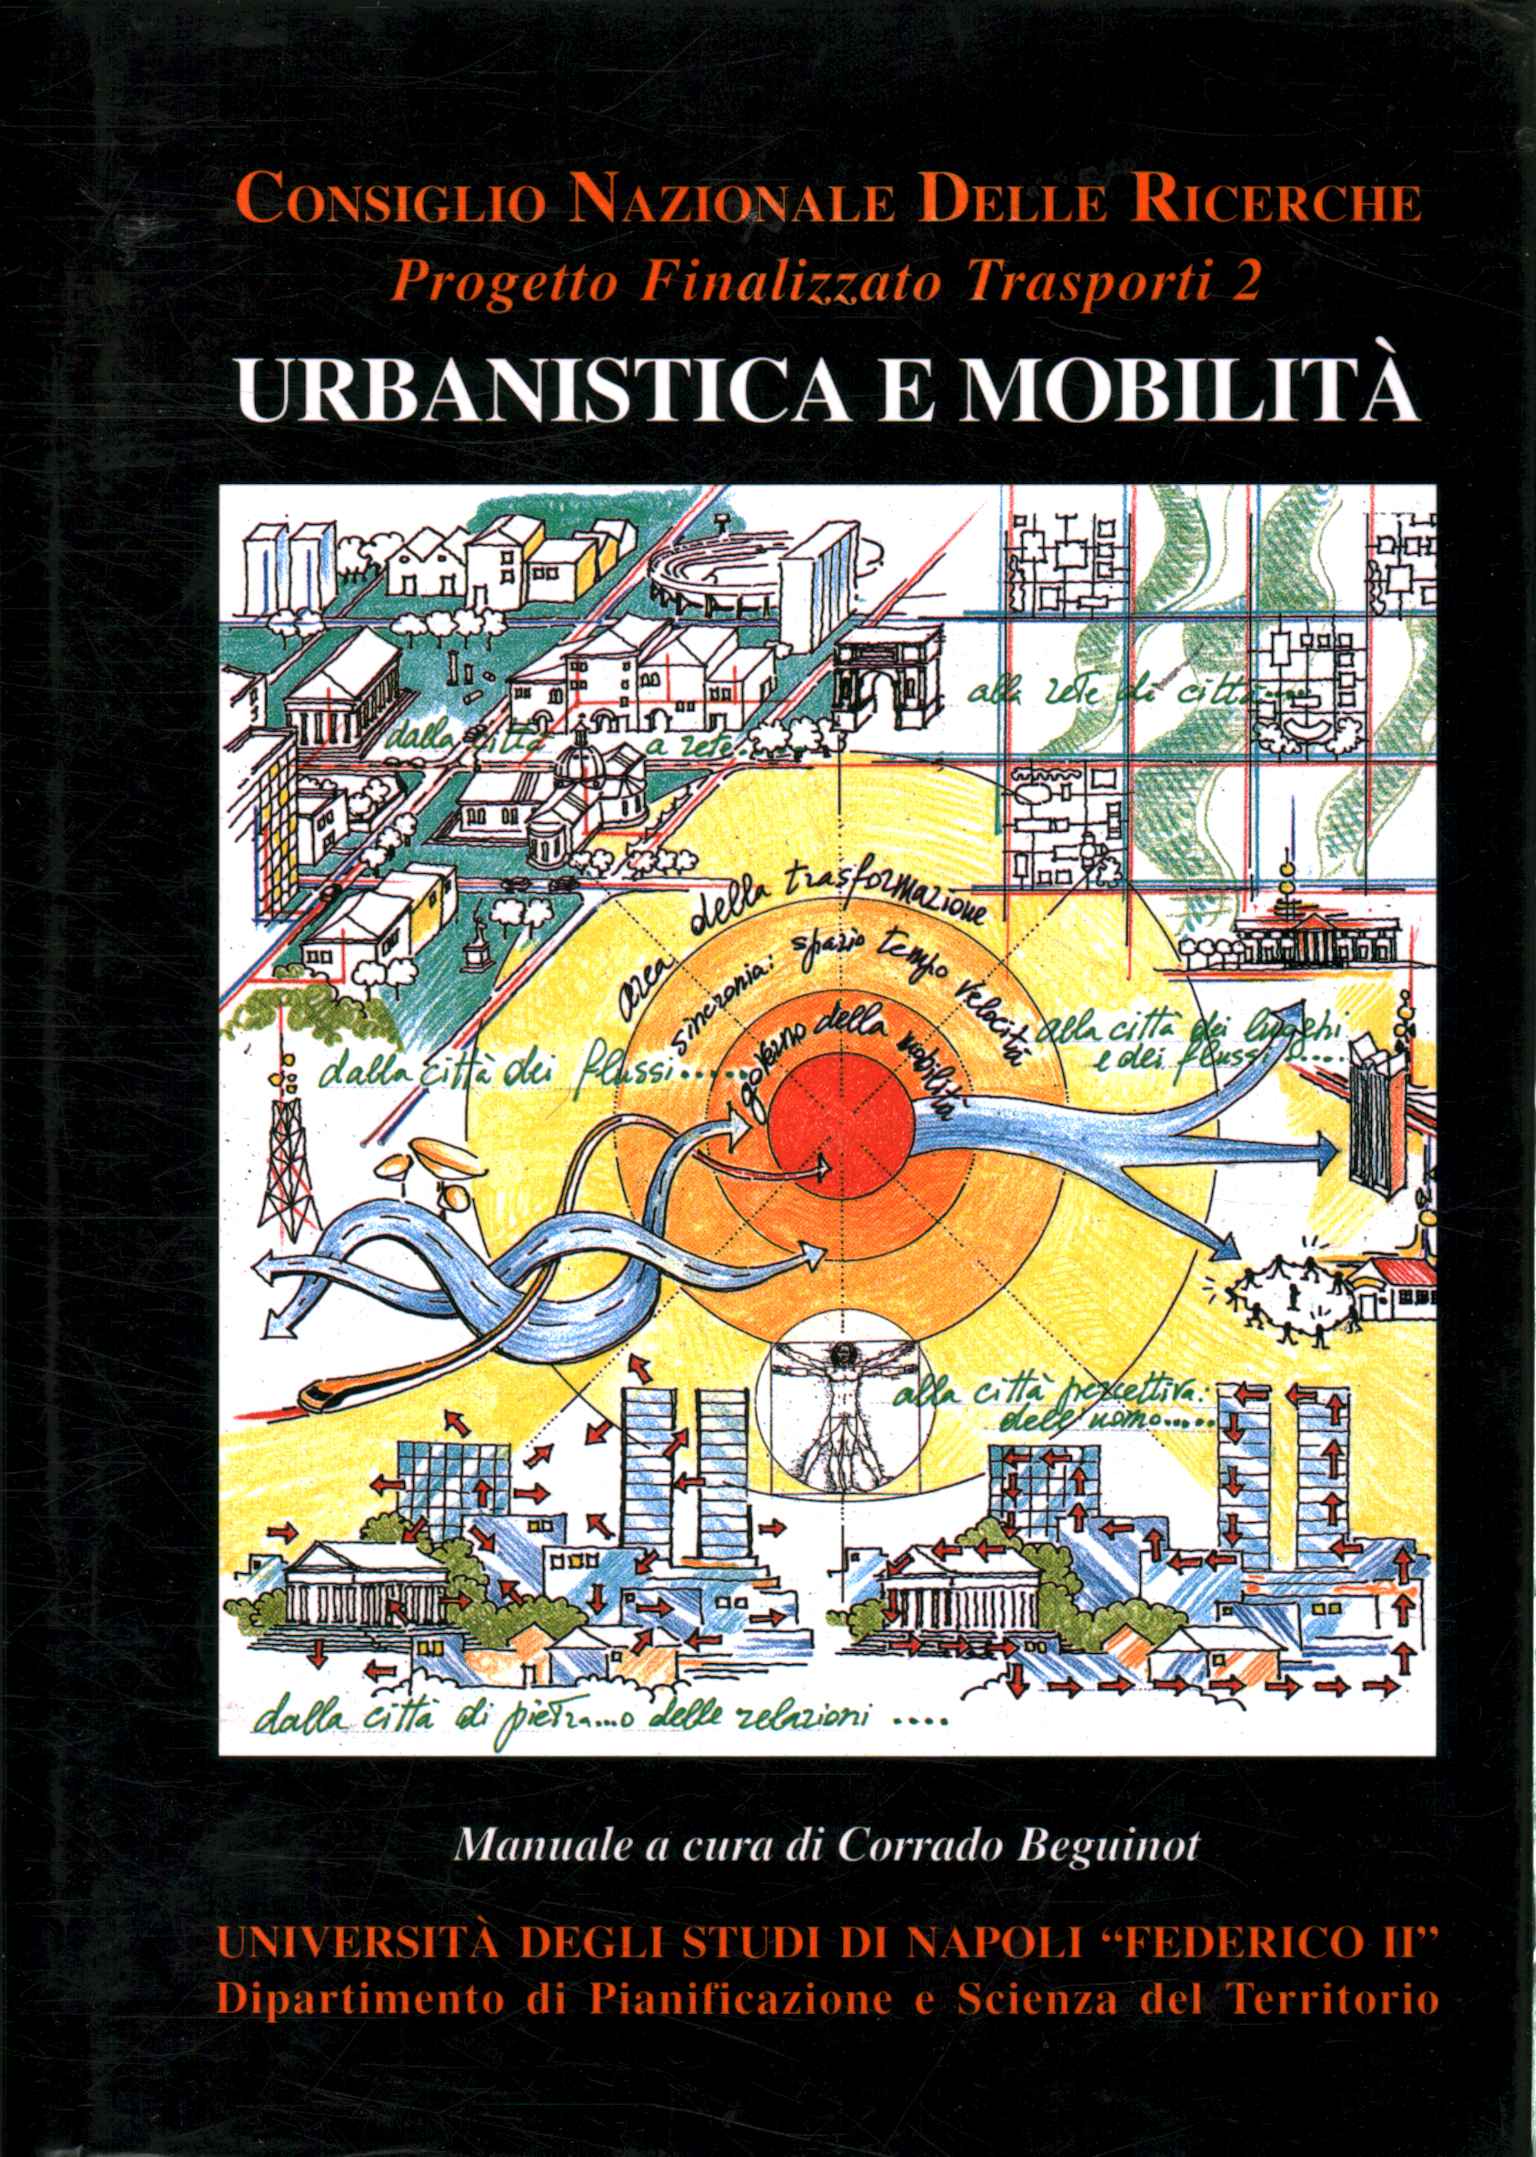 Urban planning and mobility